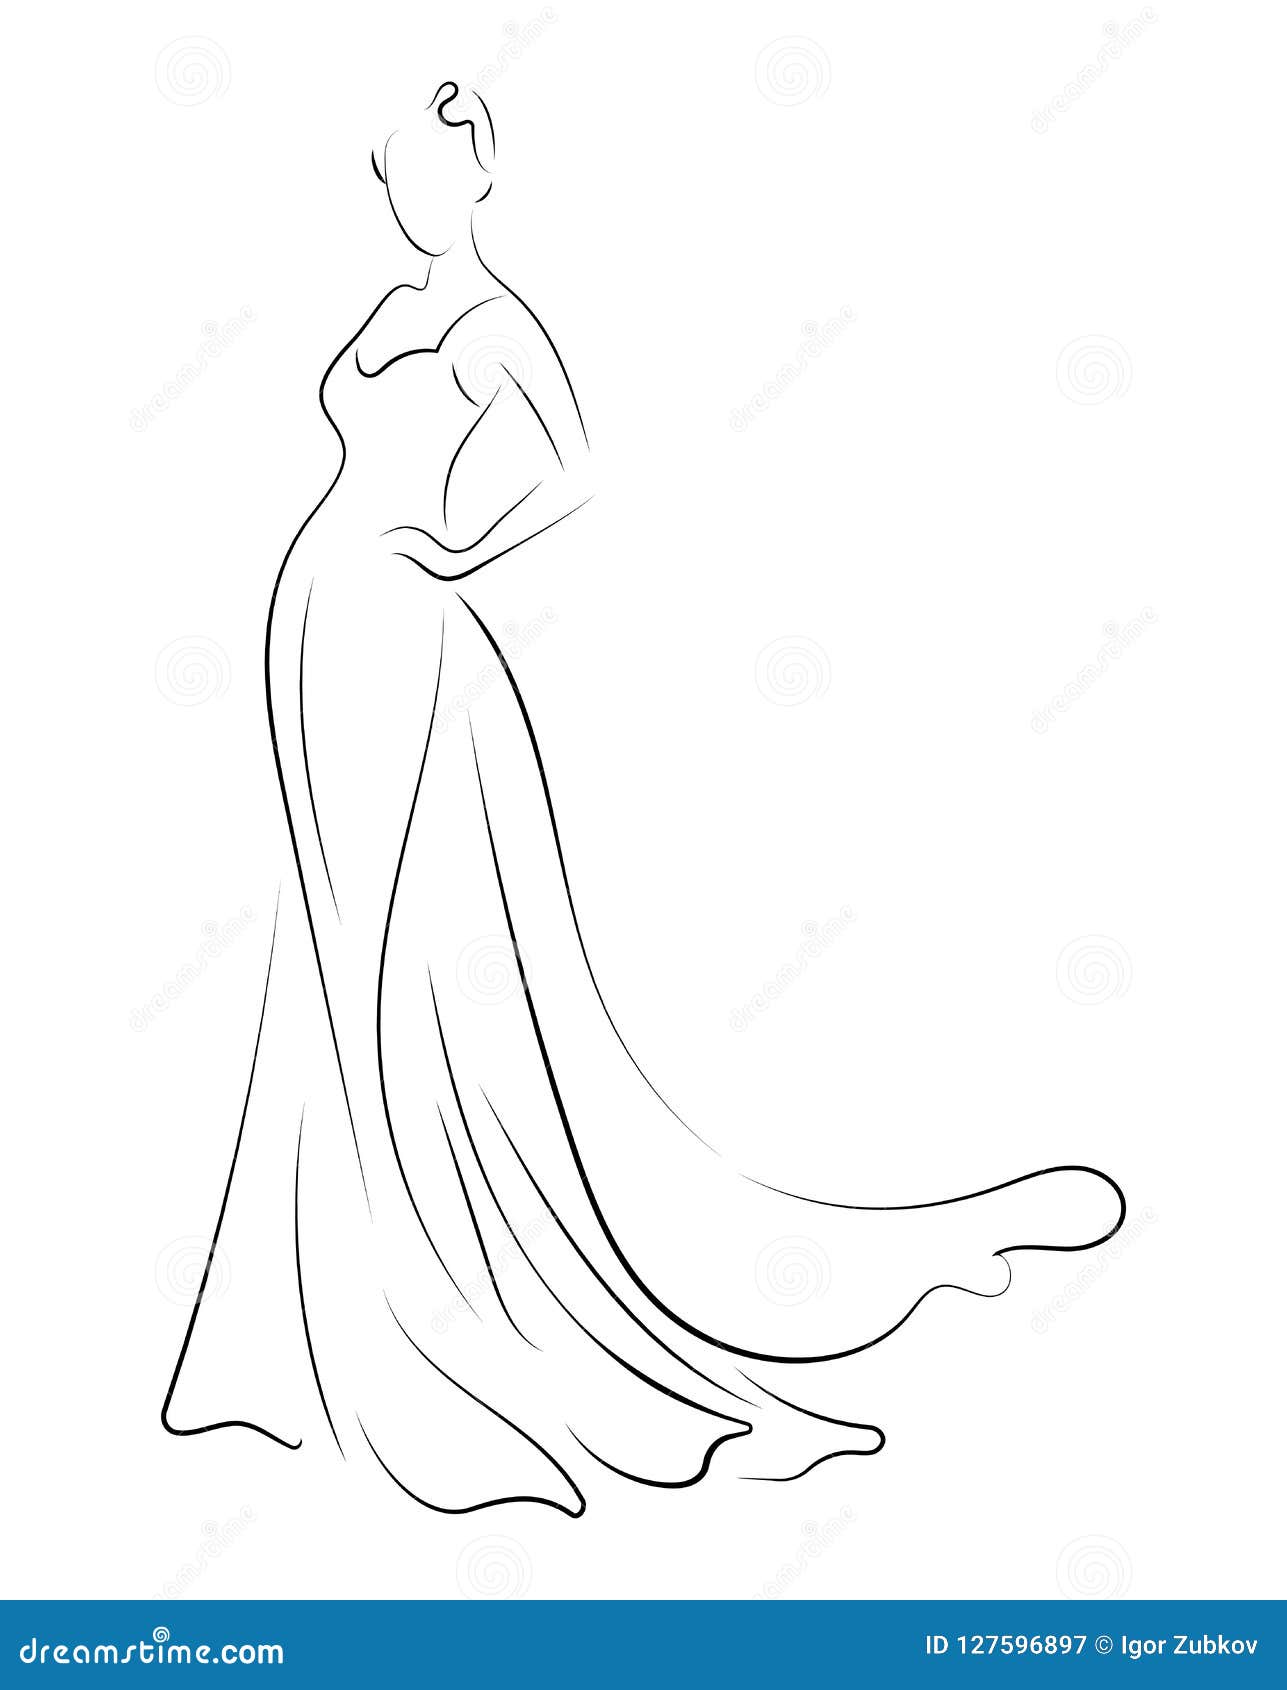 Girl in a Dress. Linear Outlines of a Female Figure in a Dress ...